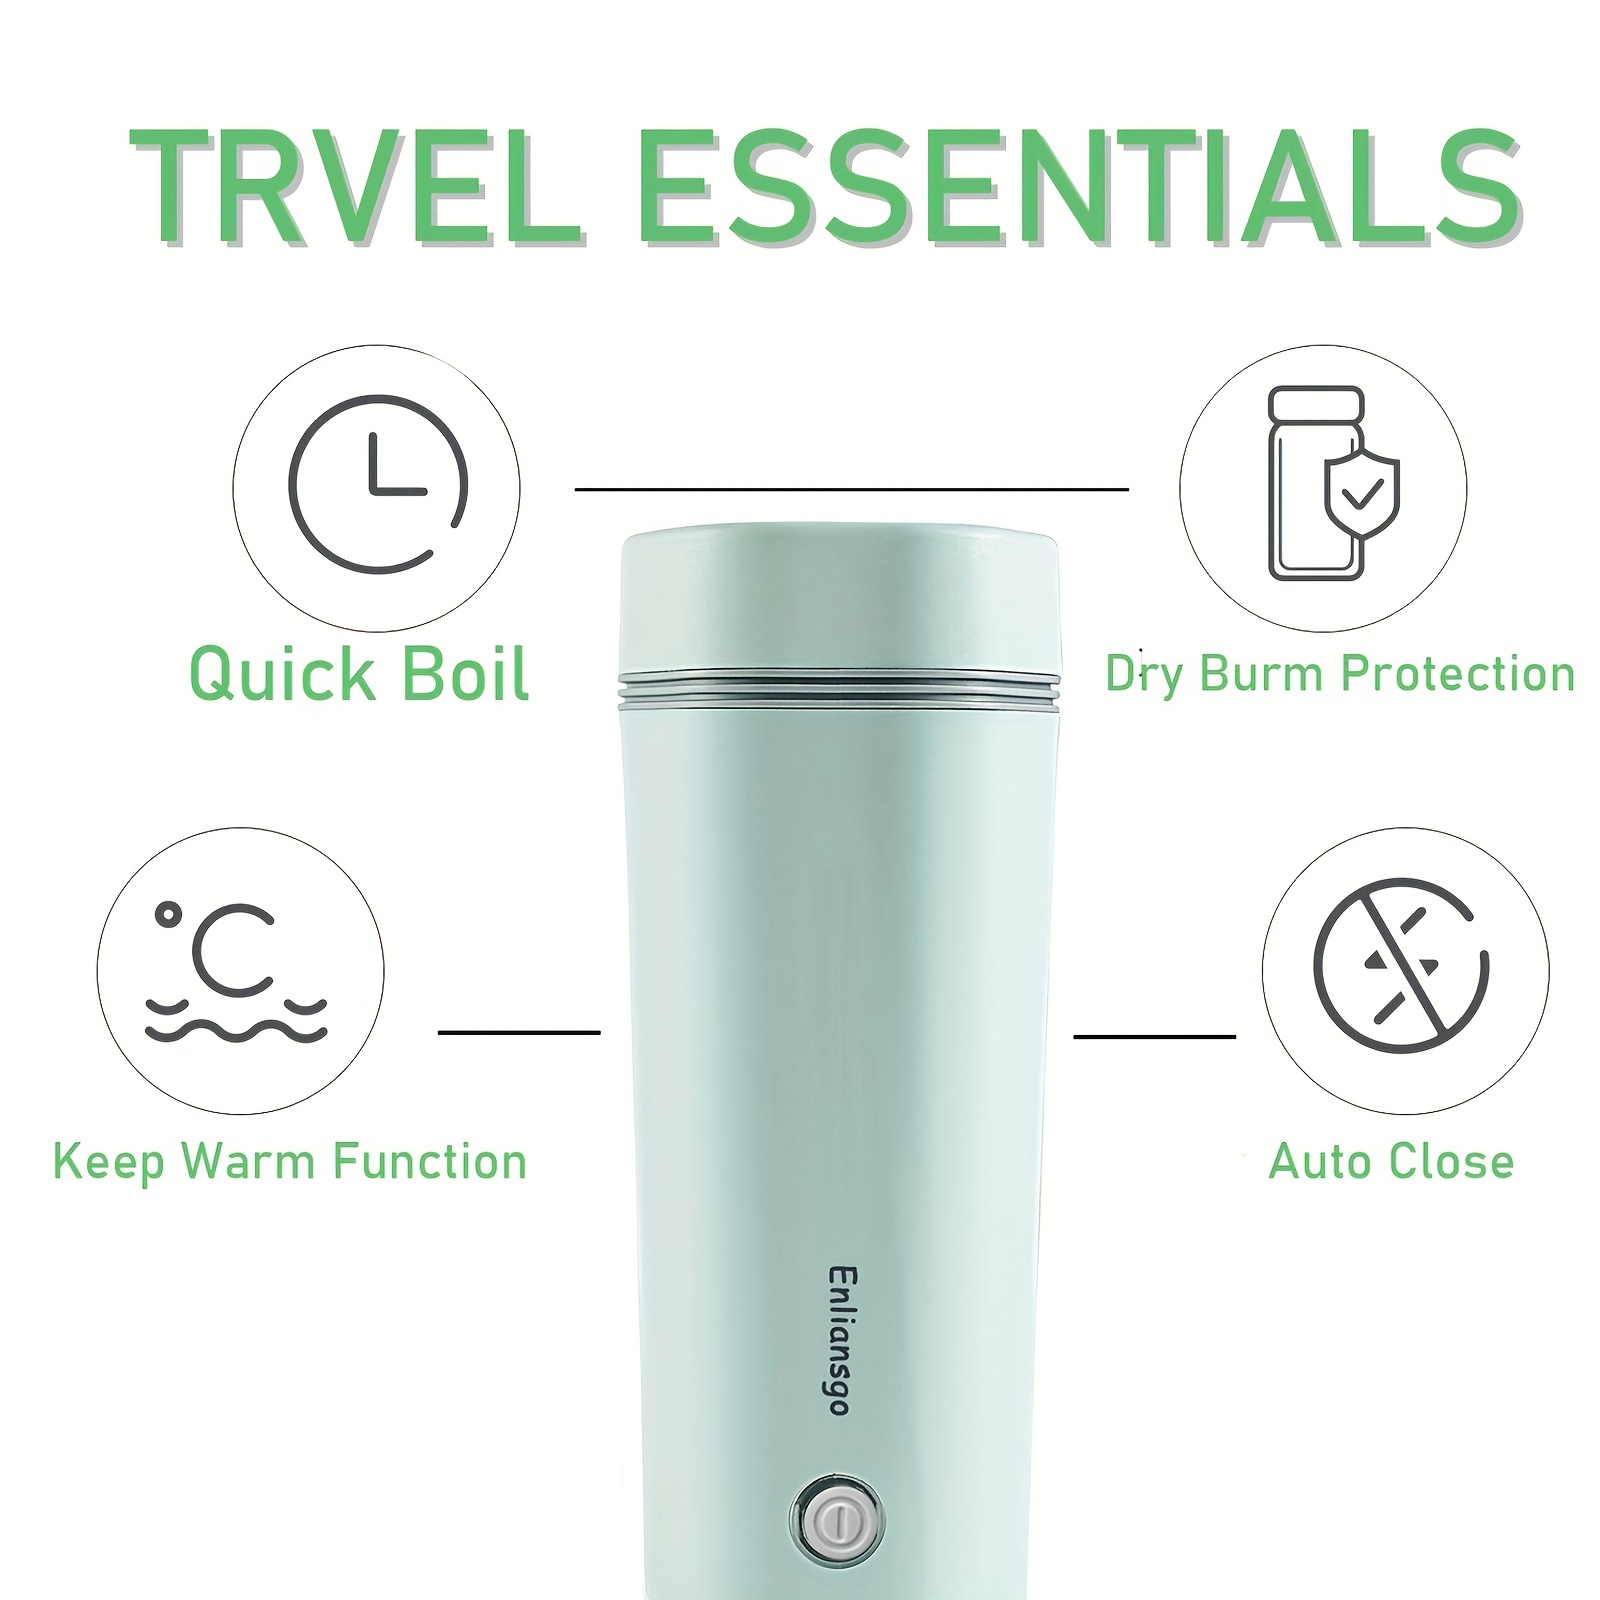 Travel Kettle Electric Small Stainless Steel - Portable Electric Kettle for  Boiling Water - Travel Tea Kettle - Portable Water Boiler - One Cup Hot